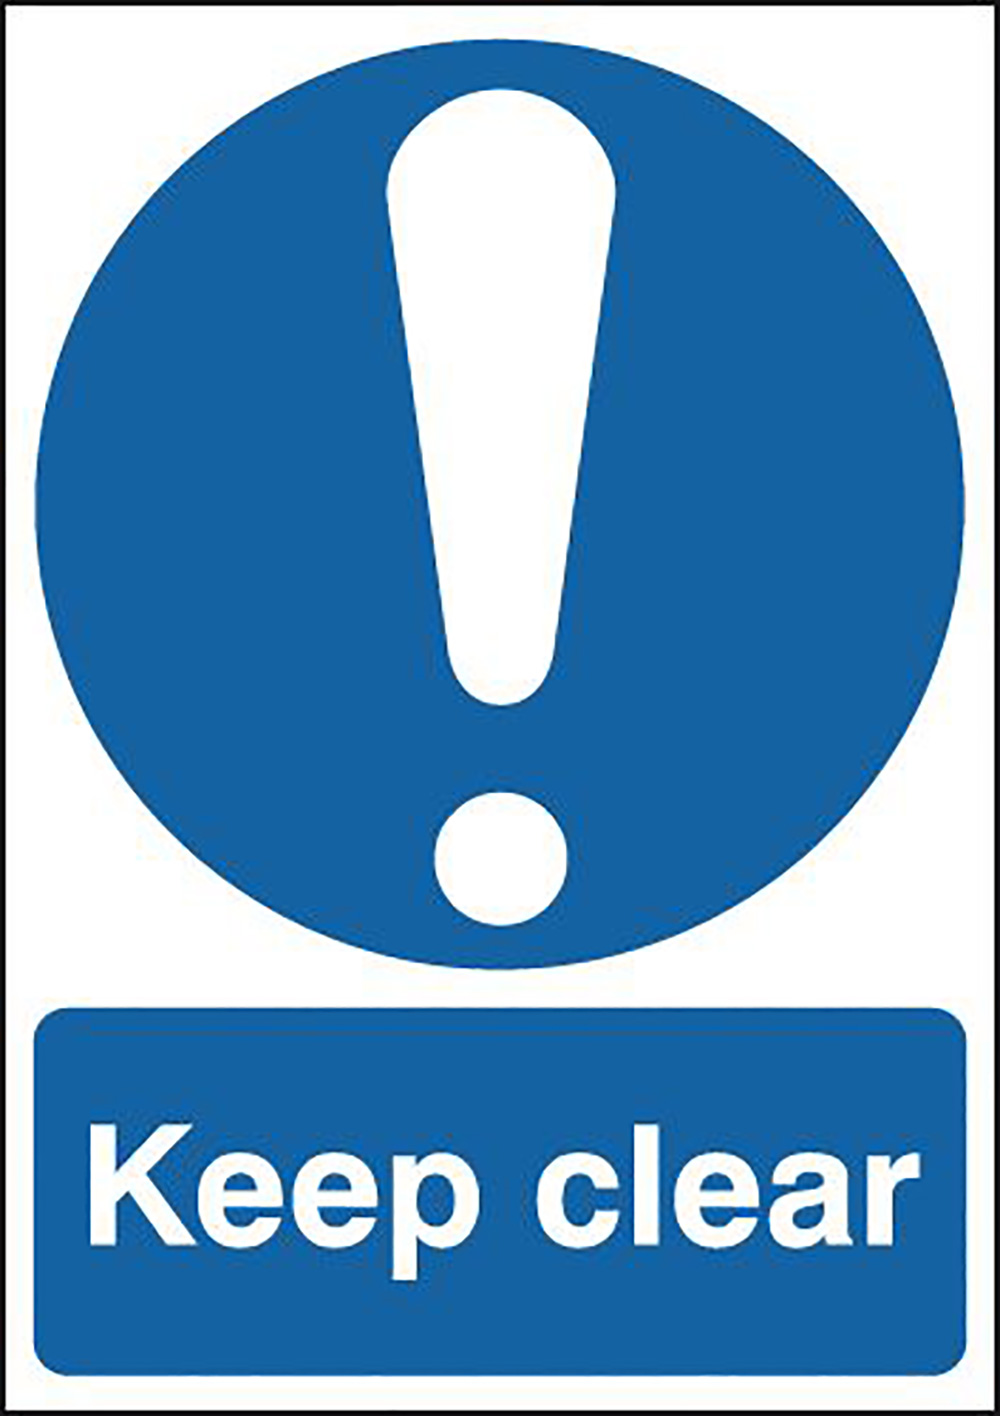 Keep Clear 297x210mm Self Adhesive Vinyl Safety Sign  